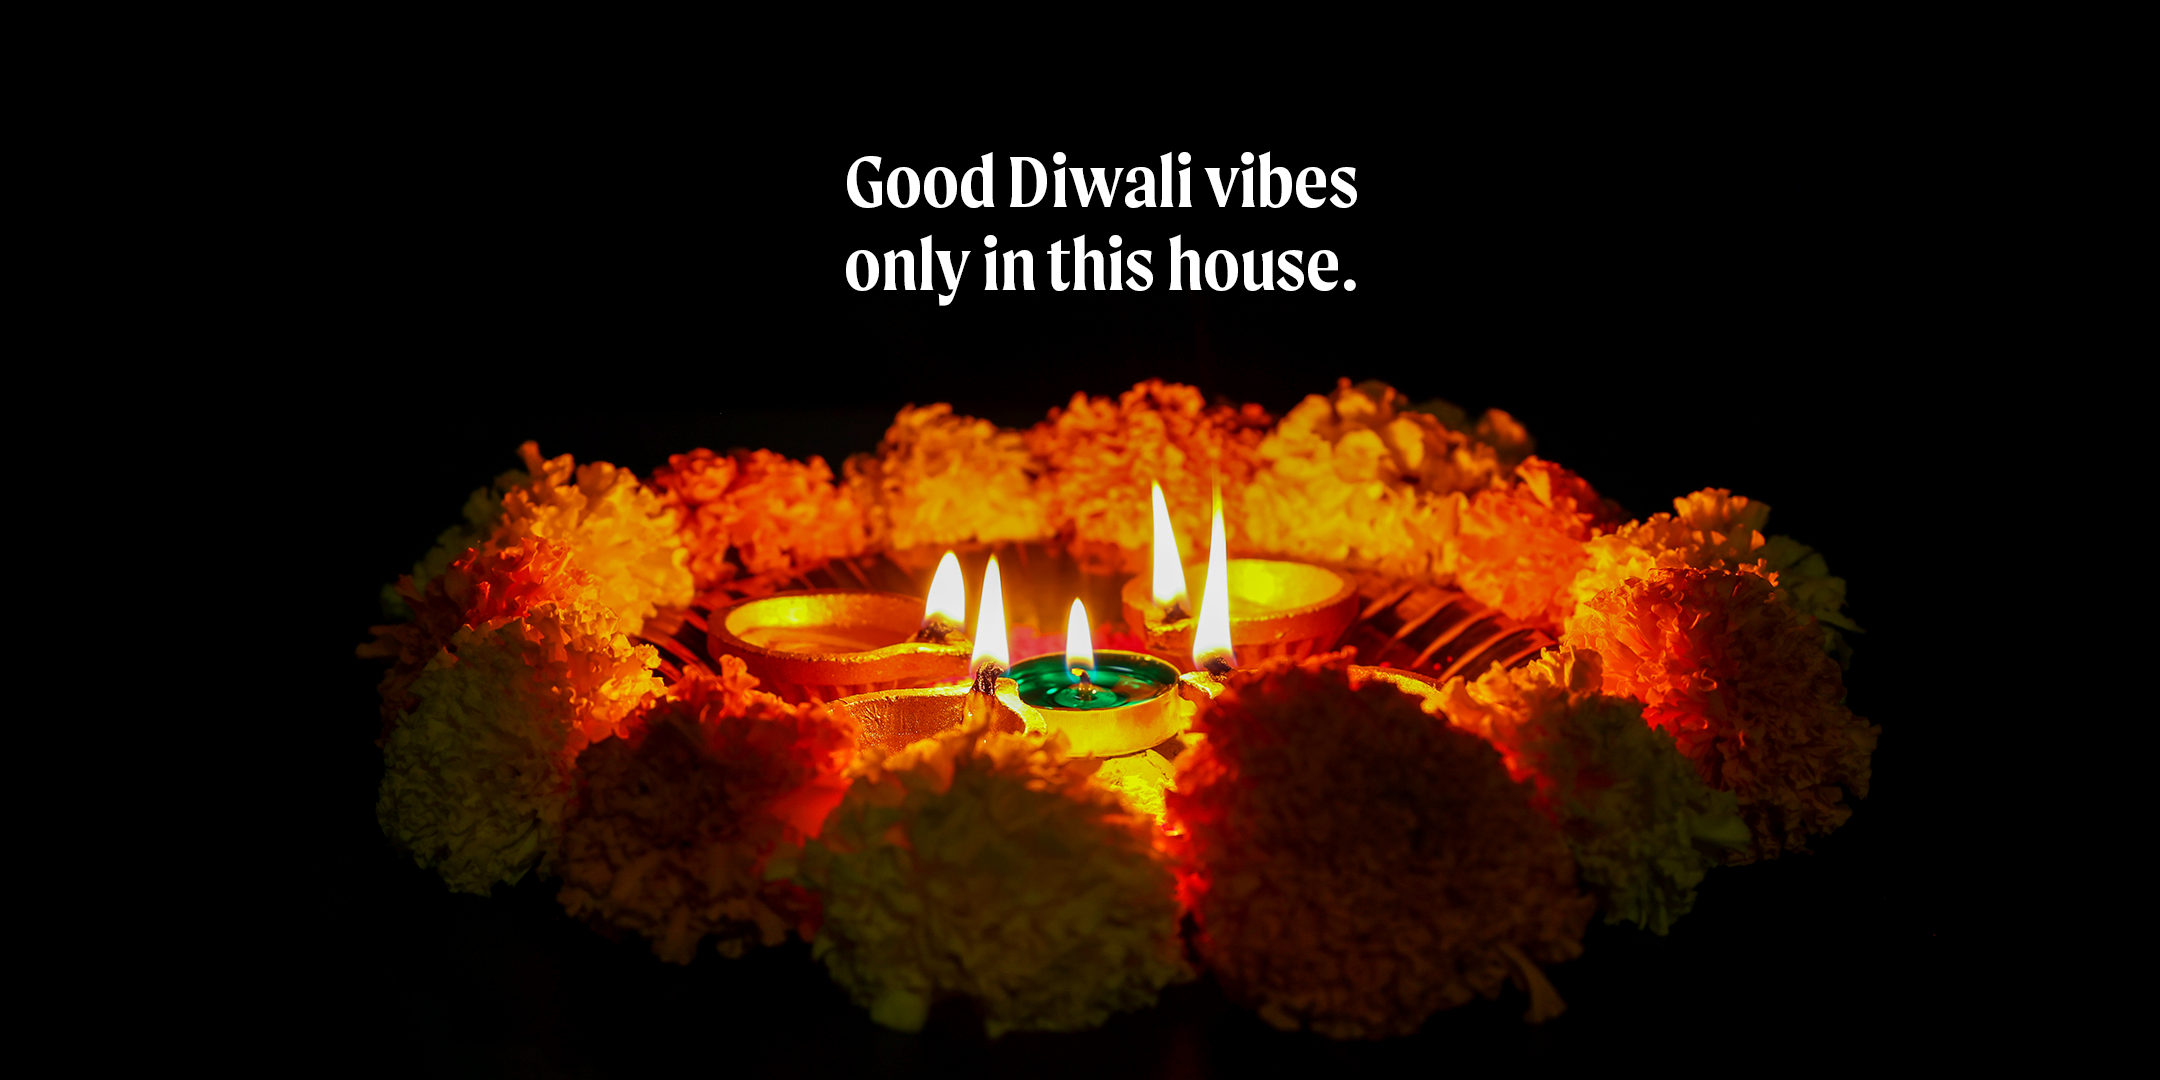 Siddharth Nigam - Happy Diwali to you and your family! I... | Facebook